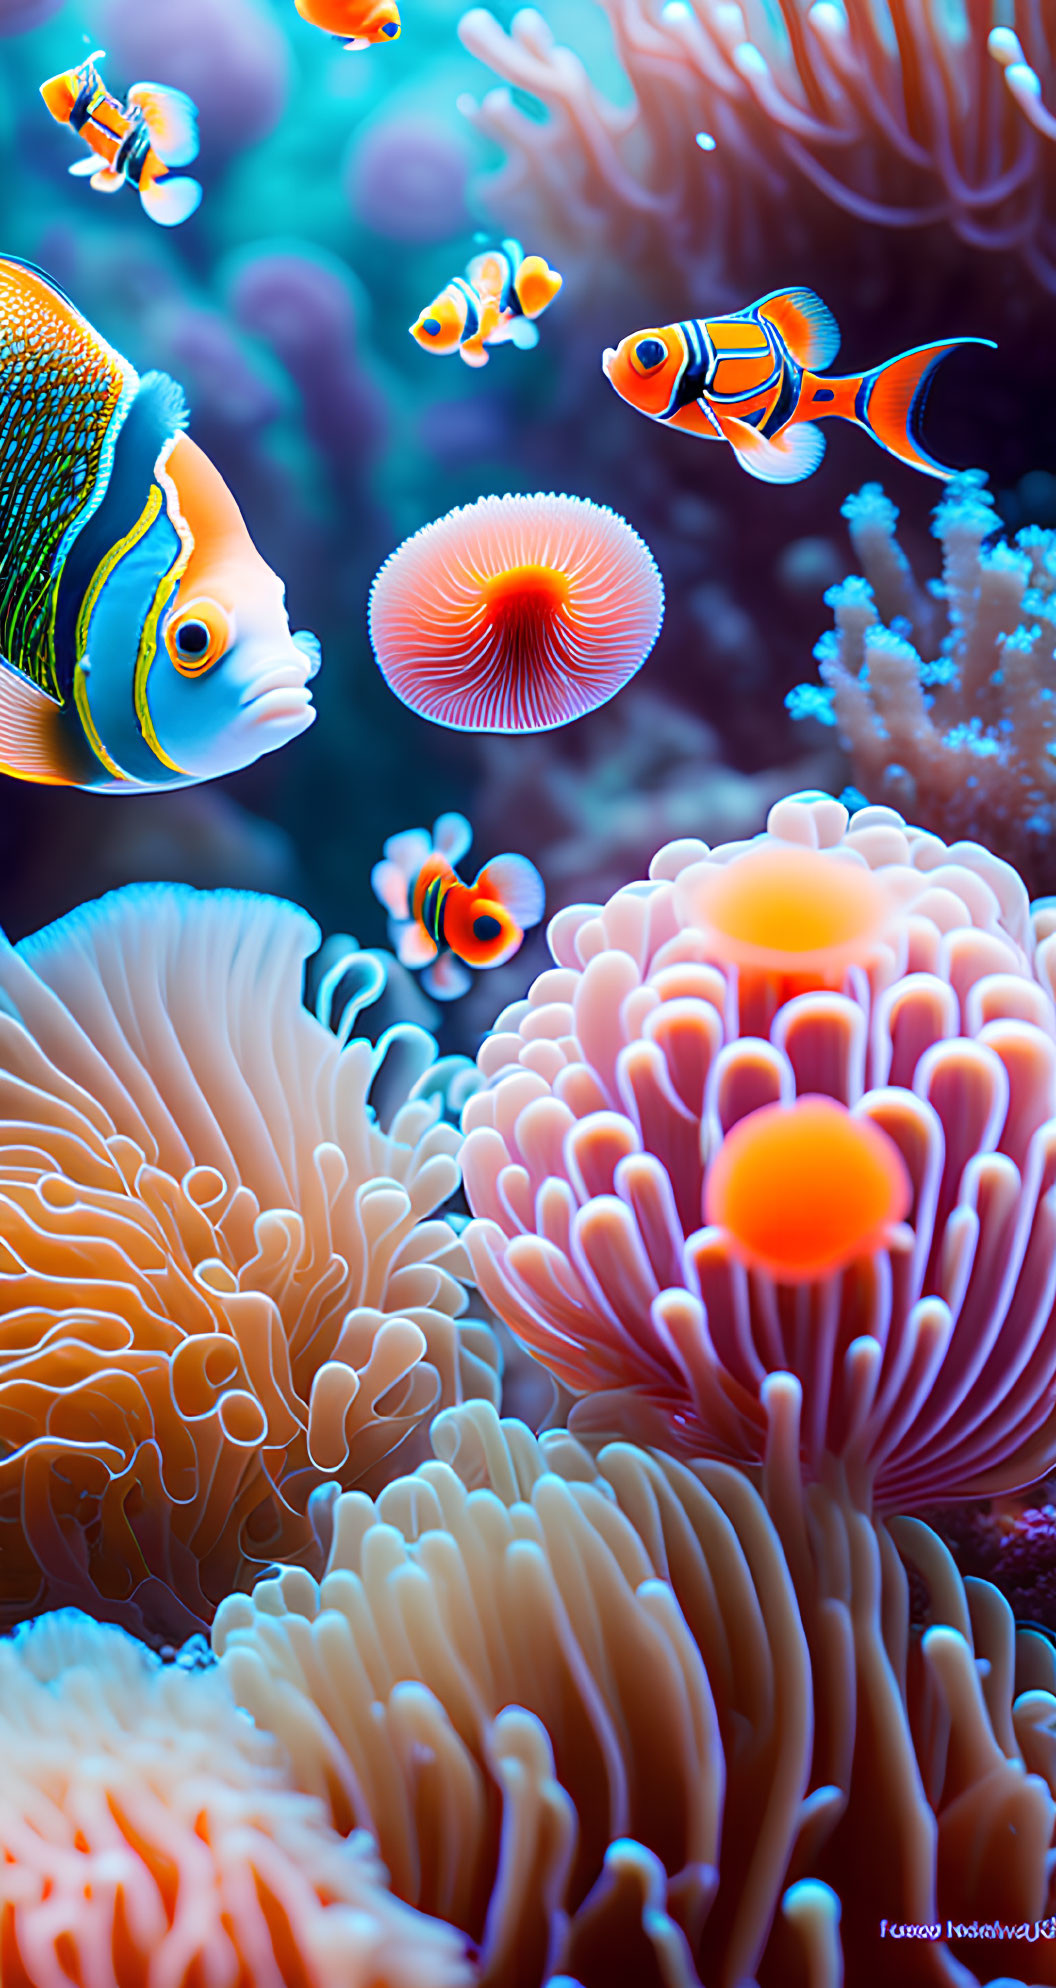 Colorful Clownfish Among Coral and Anemones in Vibrant Underwater Scene